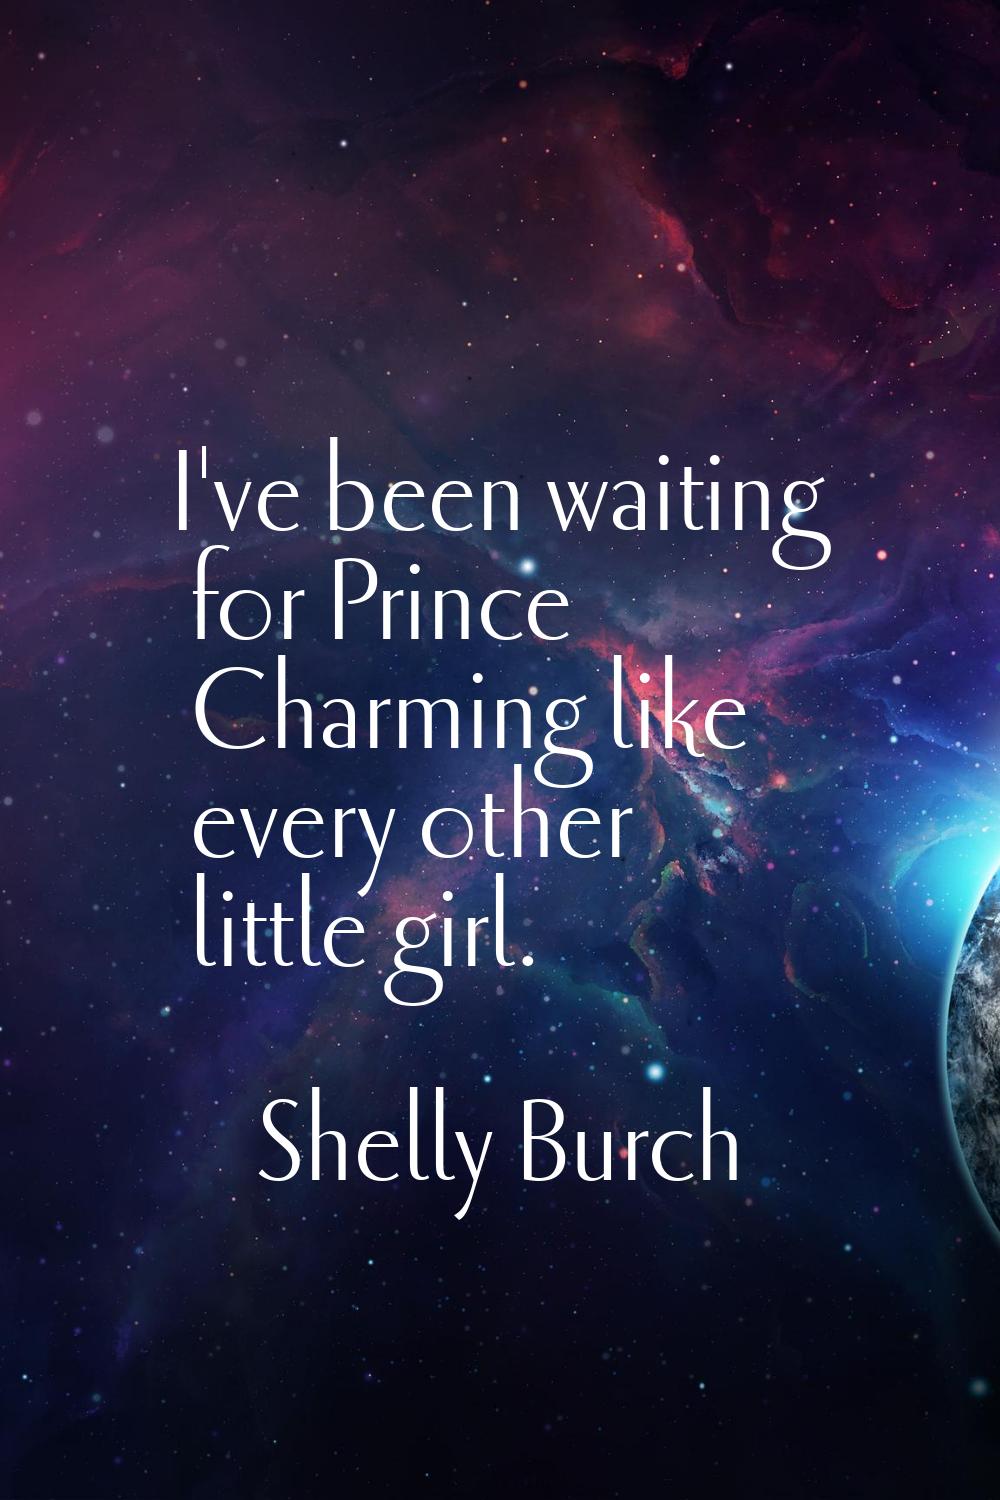 I've been waiting for Prince Charming like every other little girl.